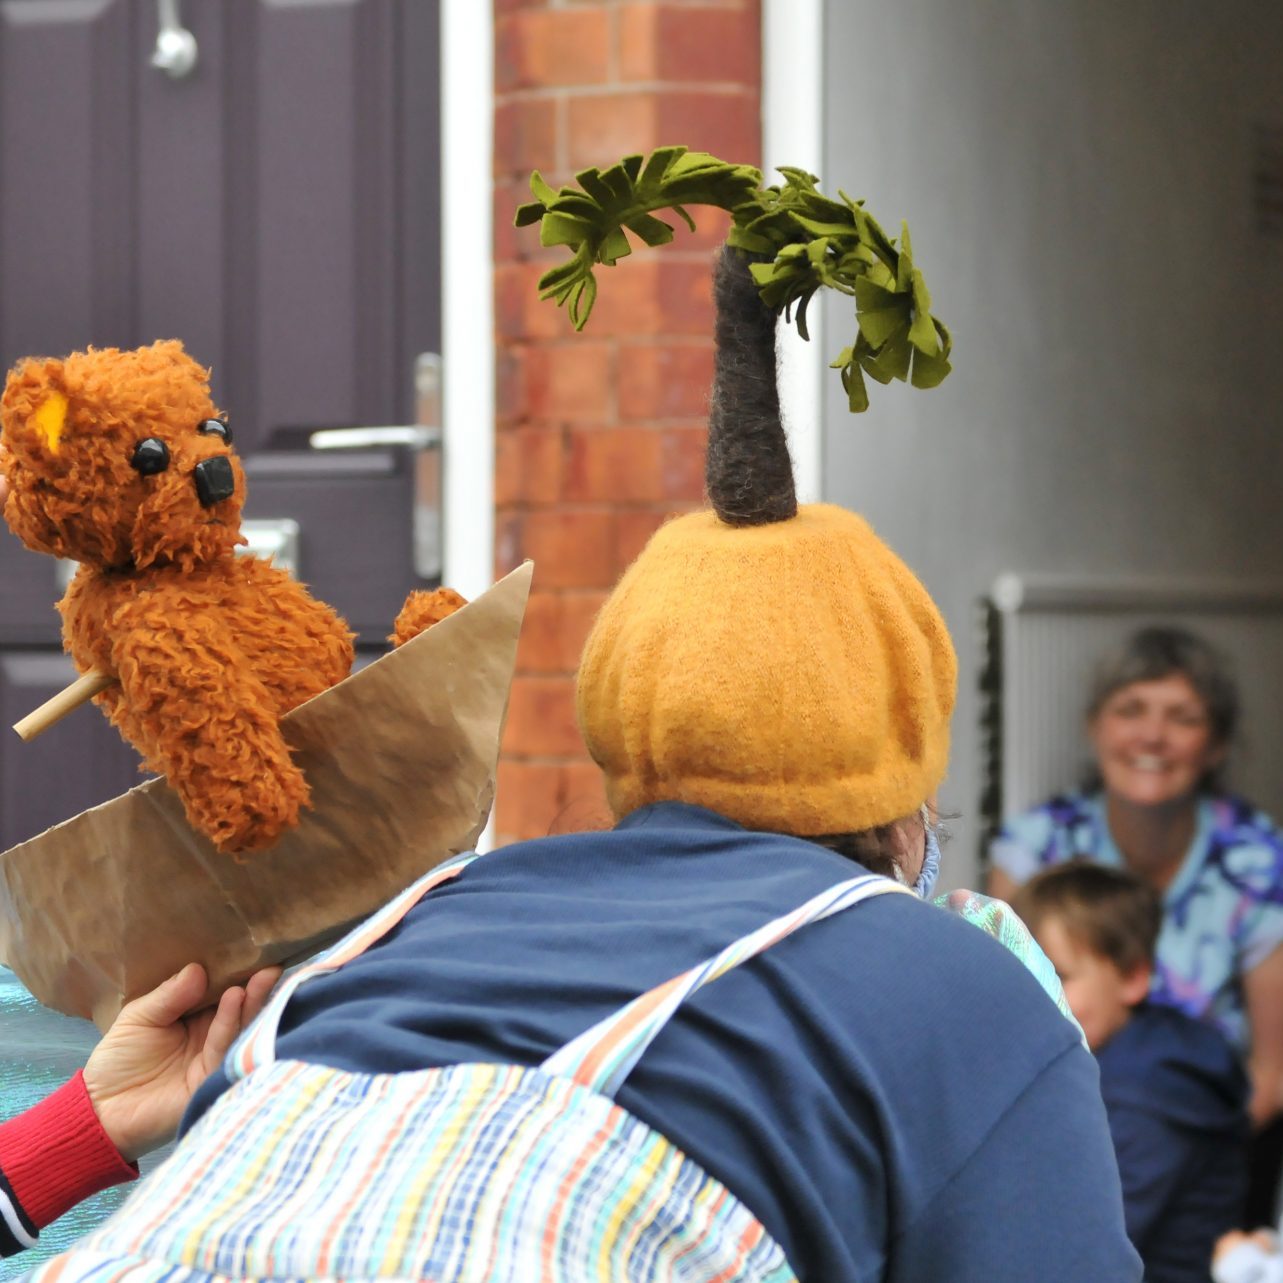 Performer with palm tree hat and teddy bear puppet